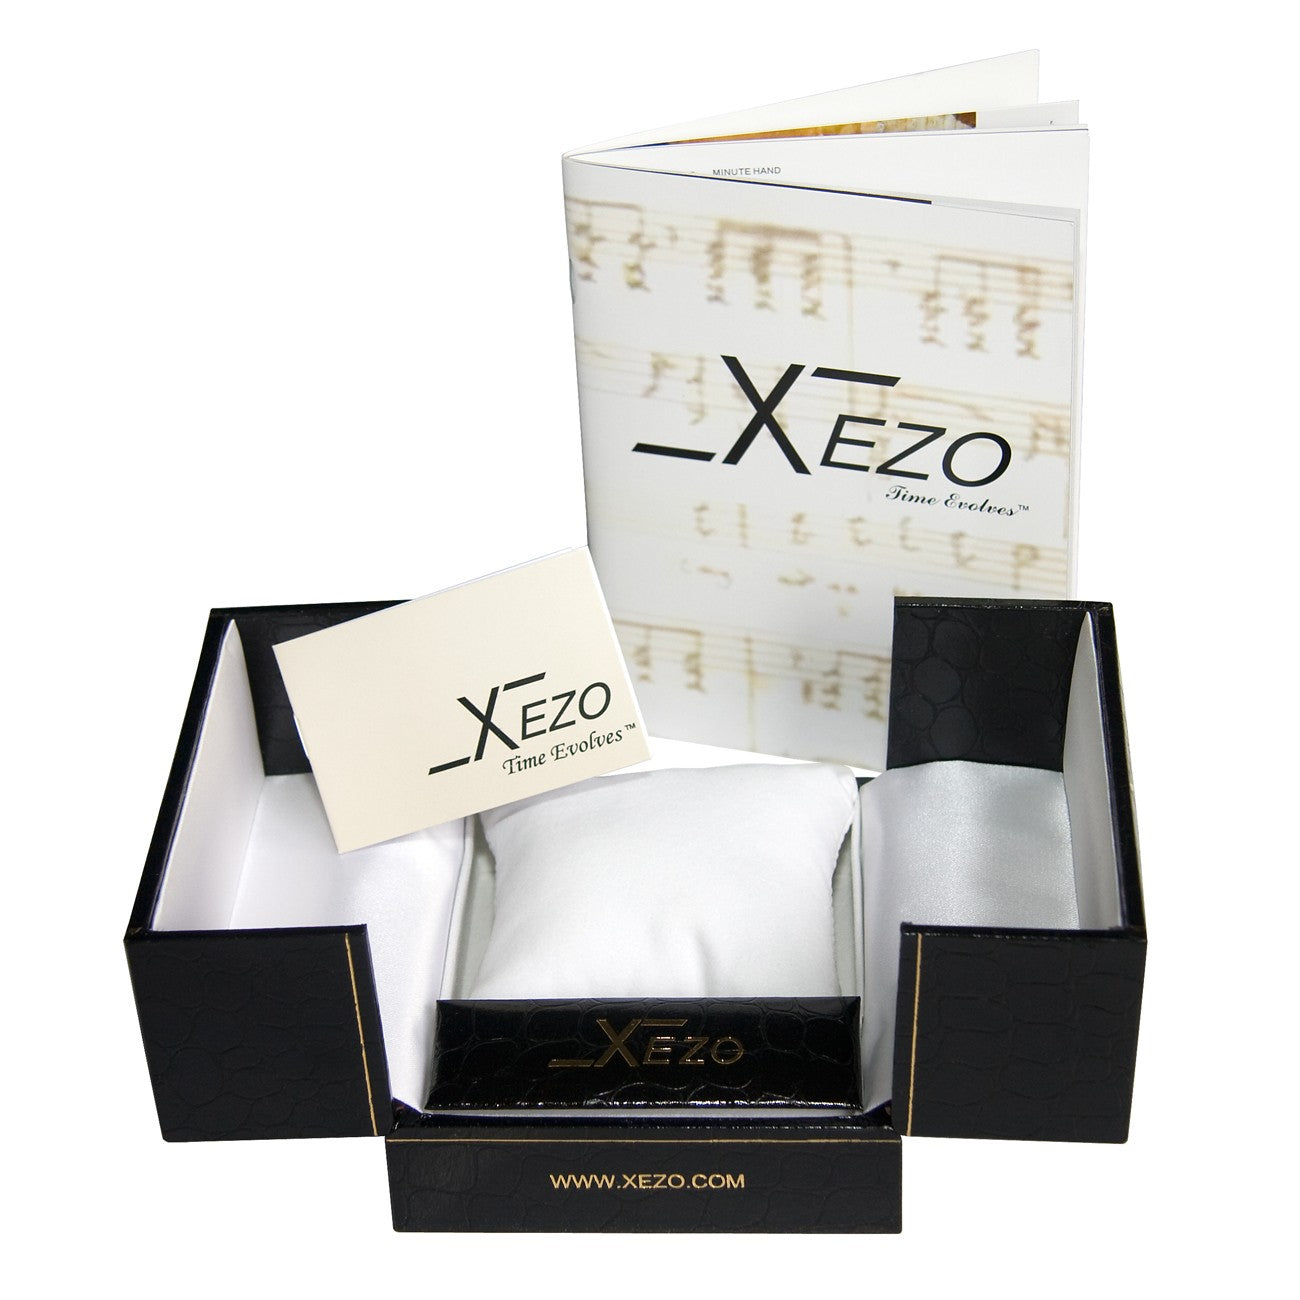 Xezo - Black gift box, certificate and manual of the Air Commando D45-SB watch